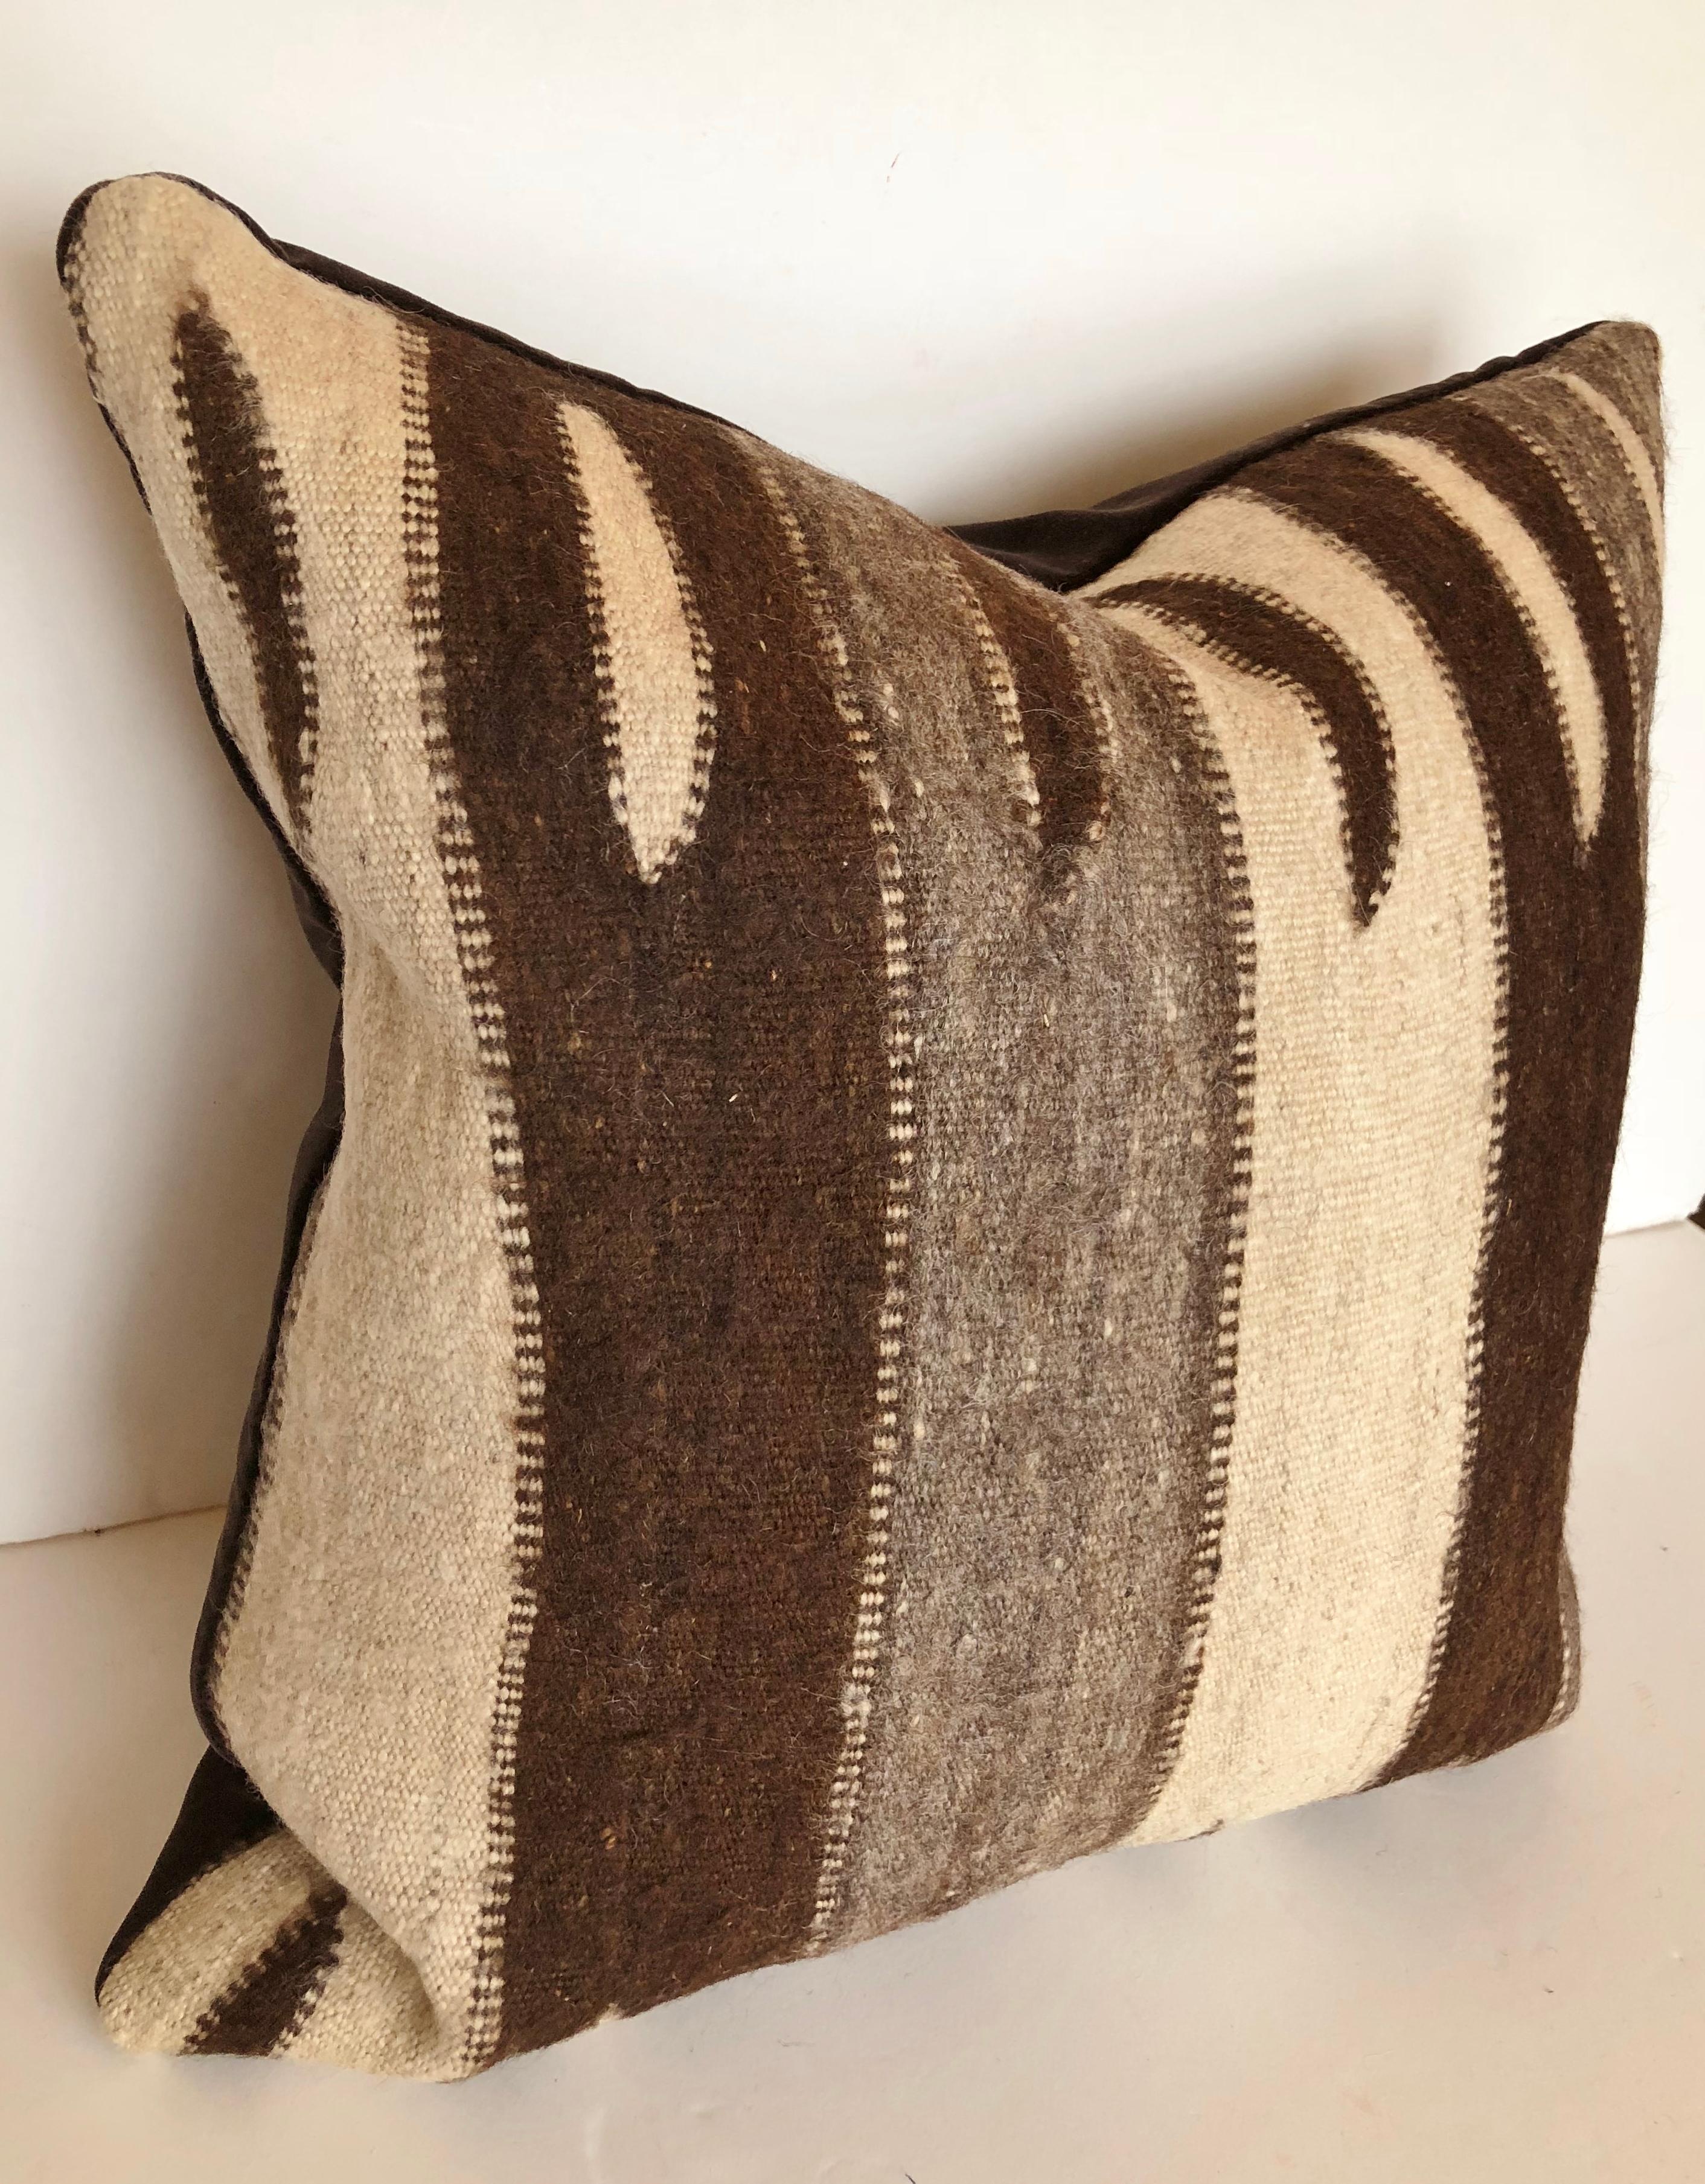 Custom pillow cut from a vintage hand loomed wool Moroccan Rug from the Ourika Valley, Upper Atlas Mountains. Thickly woven wool is soft and lustrous with natural colors. Pillow is backed in dark brown velvet, filled with an insert of 50/50 down and